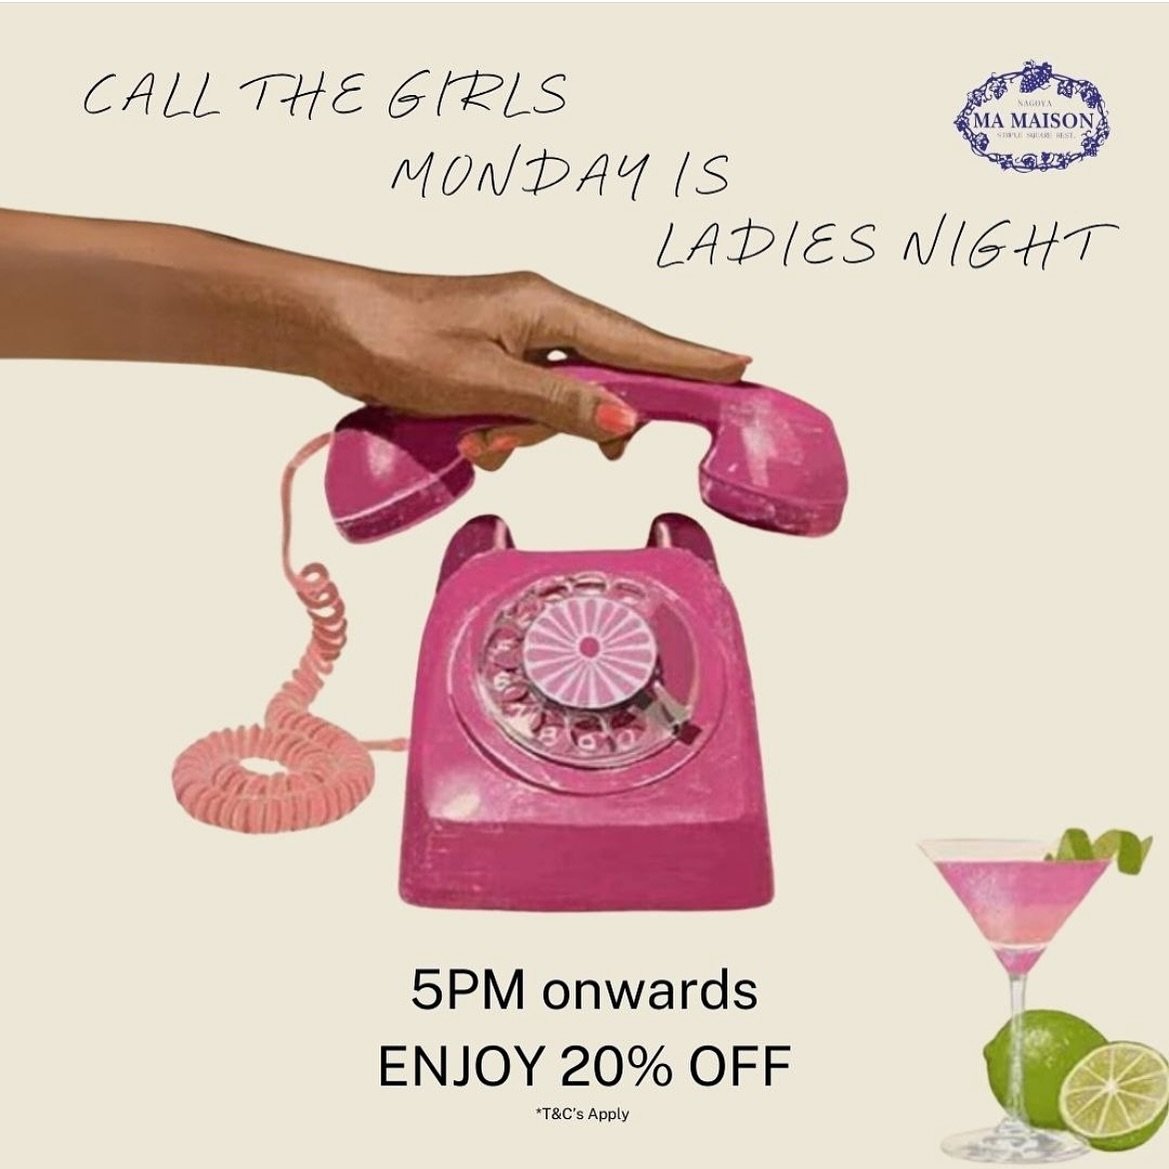 Get ready to paint the town pink, ladies! It&rsquo;s girls&rsquo; night every Monday at Ma Maison! Enjoy a fabulous 20% discount from 5 pm onwards.

Terms and conditions apply, but the fun&rsquo;s unlimited! 💕💃🏻🍹 #GirlsNightOut 

📍Ma Maison, #01